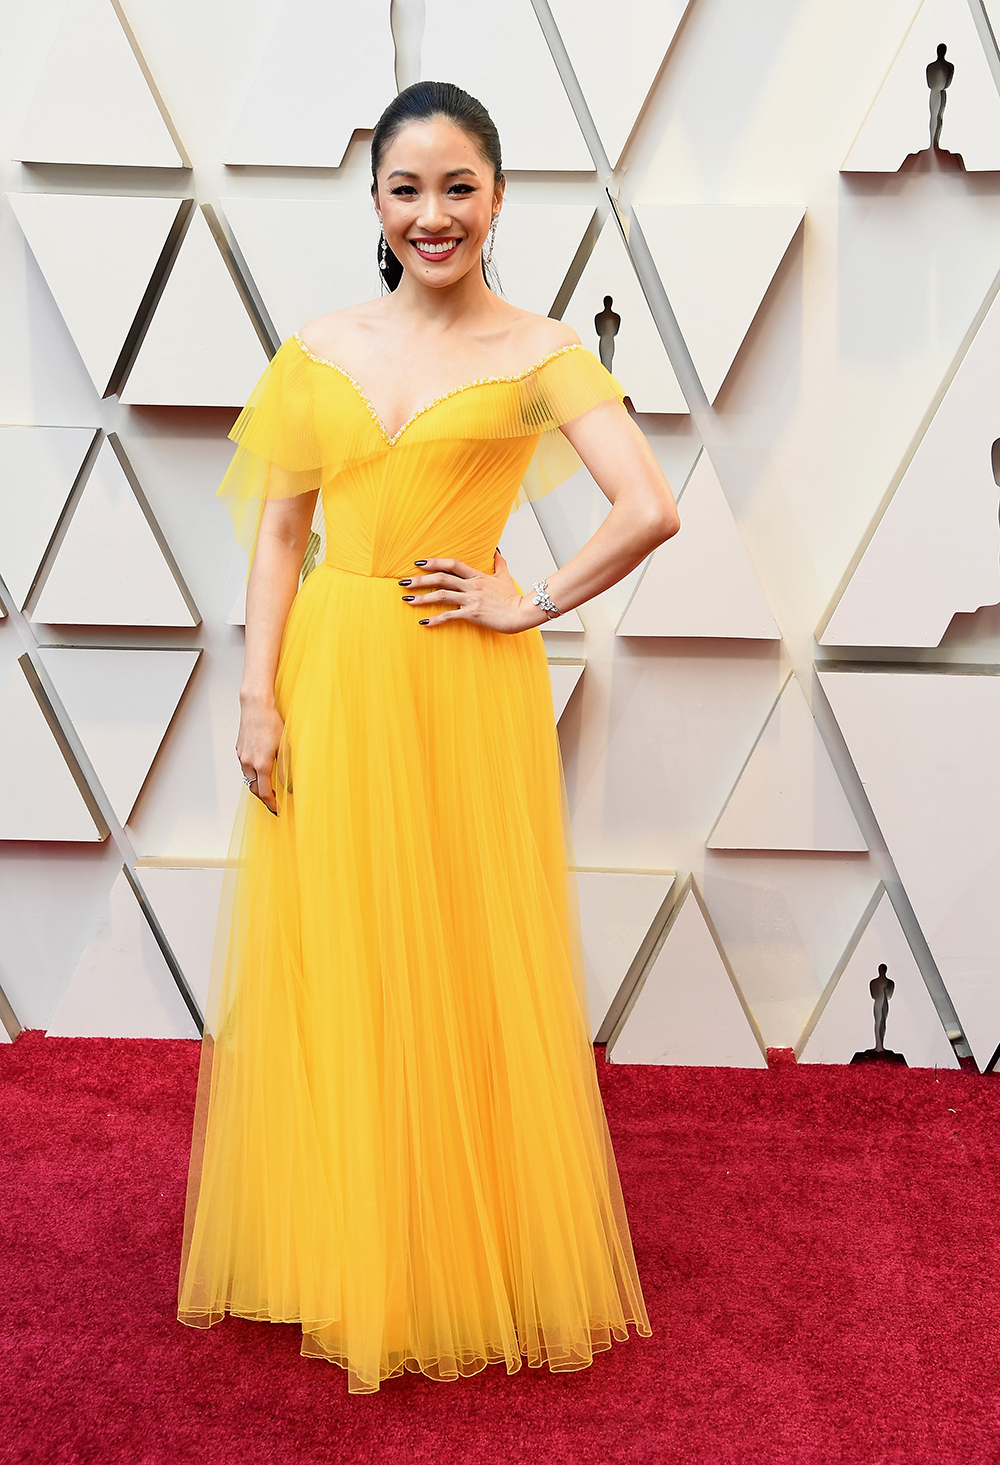 HOLLYWOOD, CA - FEBRUARY 24: Constance Wu attends the 91st Annual Academy Awards at Hollywood and Highland on February 24, 2019 in Hollywood, California. (Photo by Steve Granitz/WireImage)